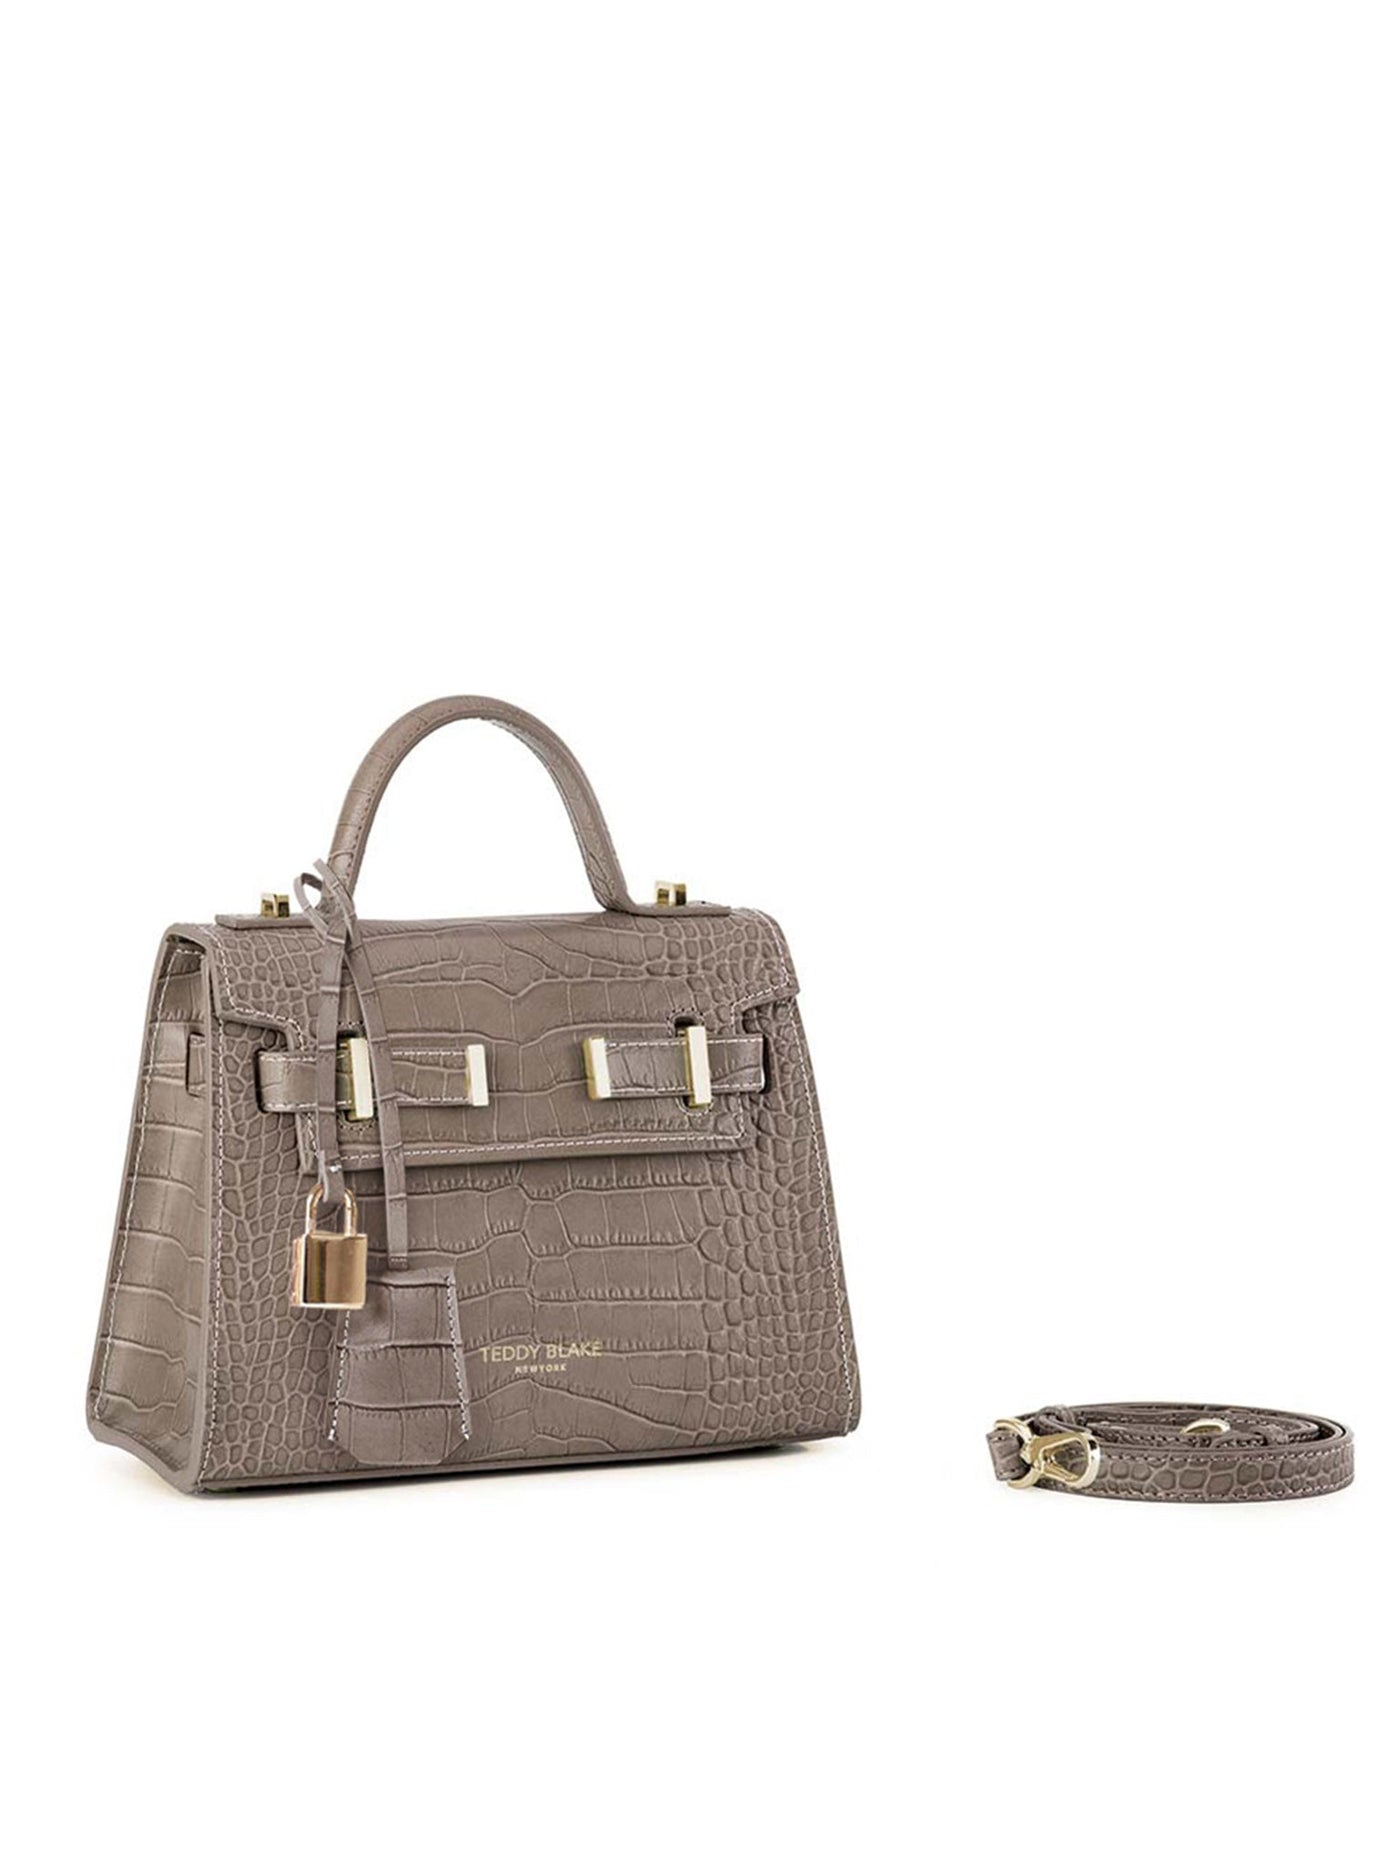 The Ava - Structured Crossbody Purse - Available in 4 sizes and 50+ colors!  - Teddy Blake